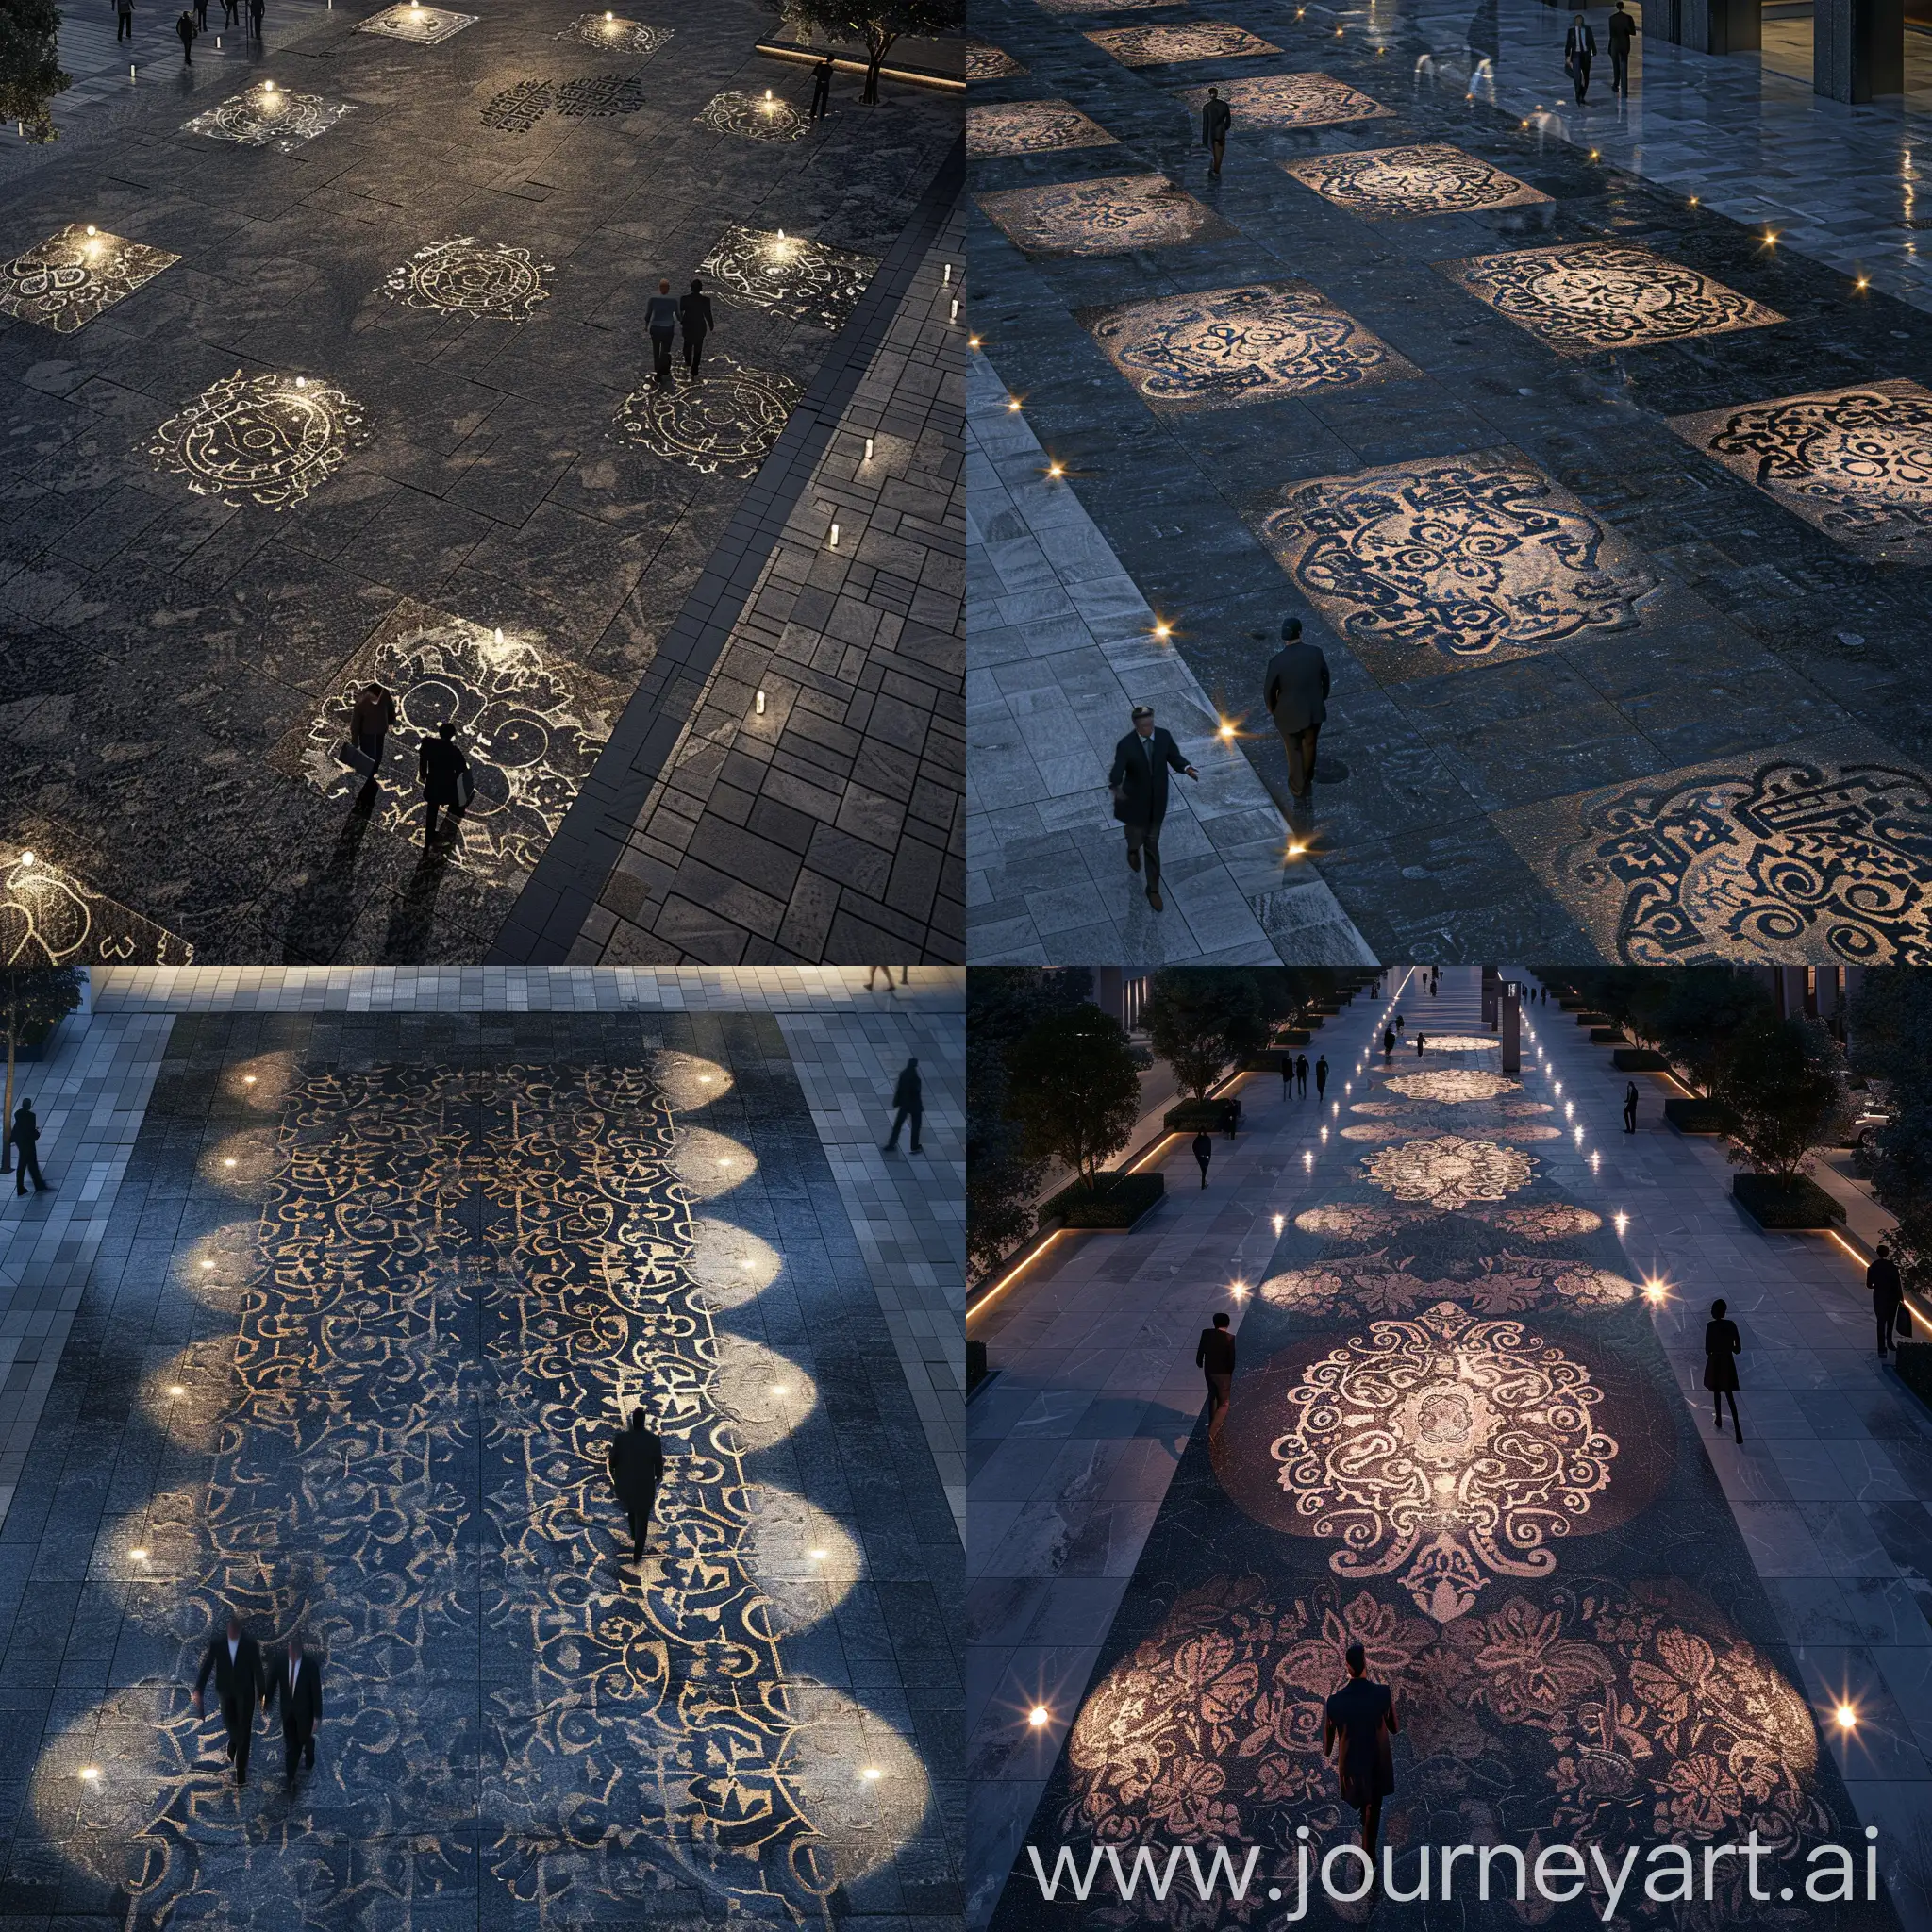 birds eye view on large stone paving in dark granite with national folk patterns in light-tone granite on business district plaza, stone surface is mostly dark, national pattern is repeatative, pattern is like a magic tablecloth, several business people walking in a large distance, lighting spotlights installed in pavement following folk patterns in paving, parametric folk granite patterns